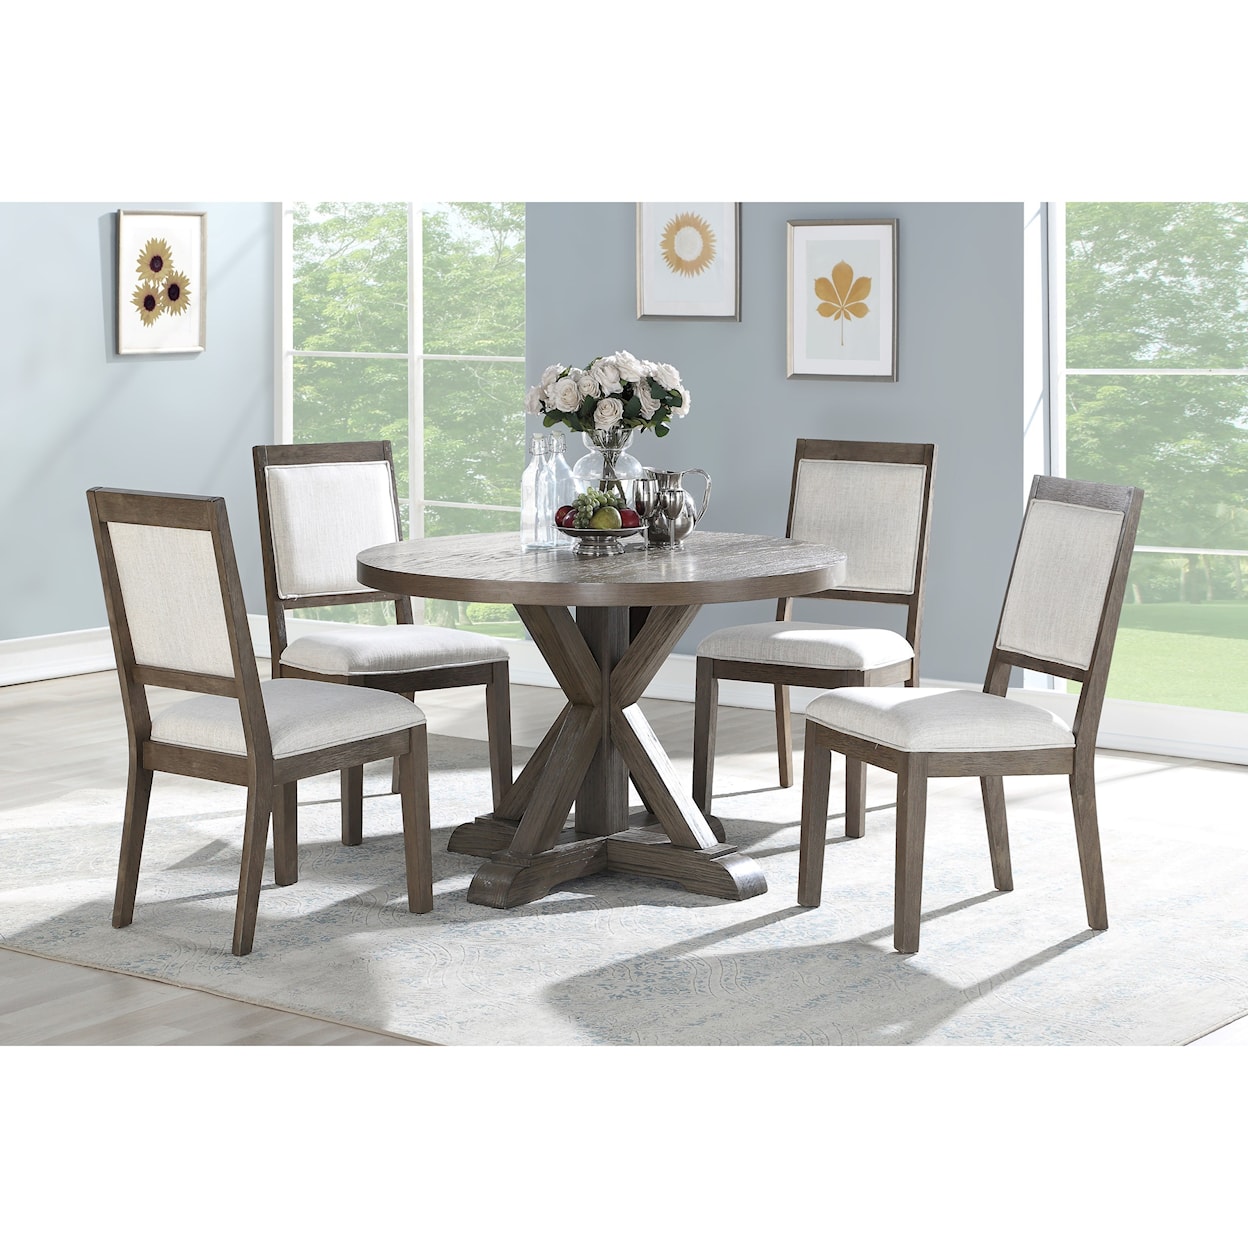 Steve Silver Molly 5 Piece Table and Chair Set